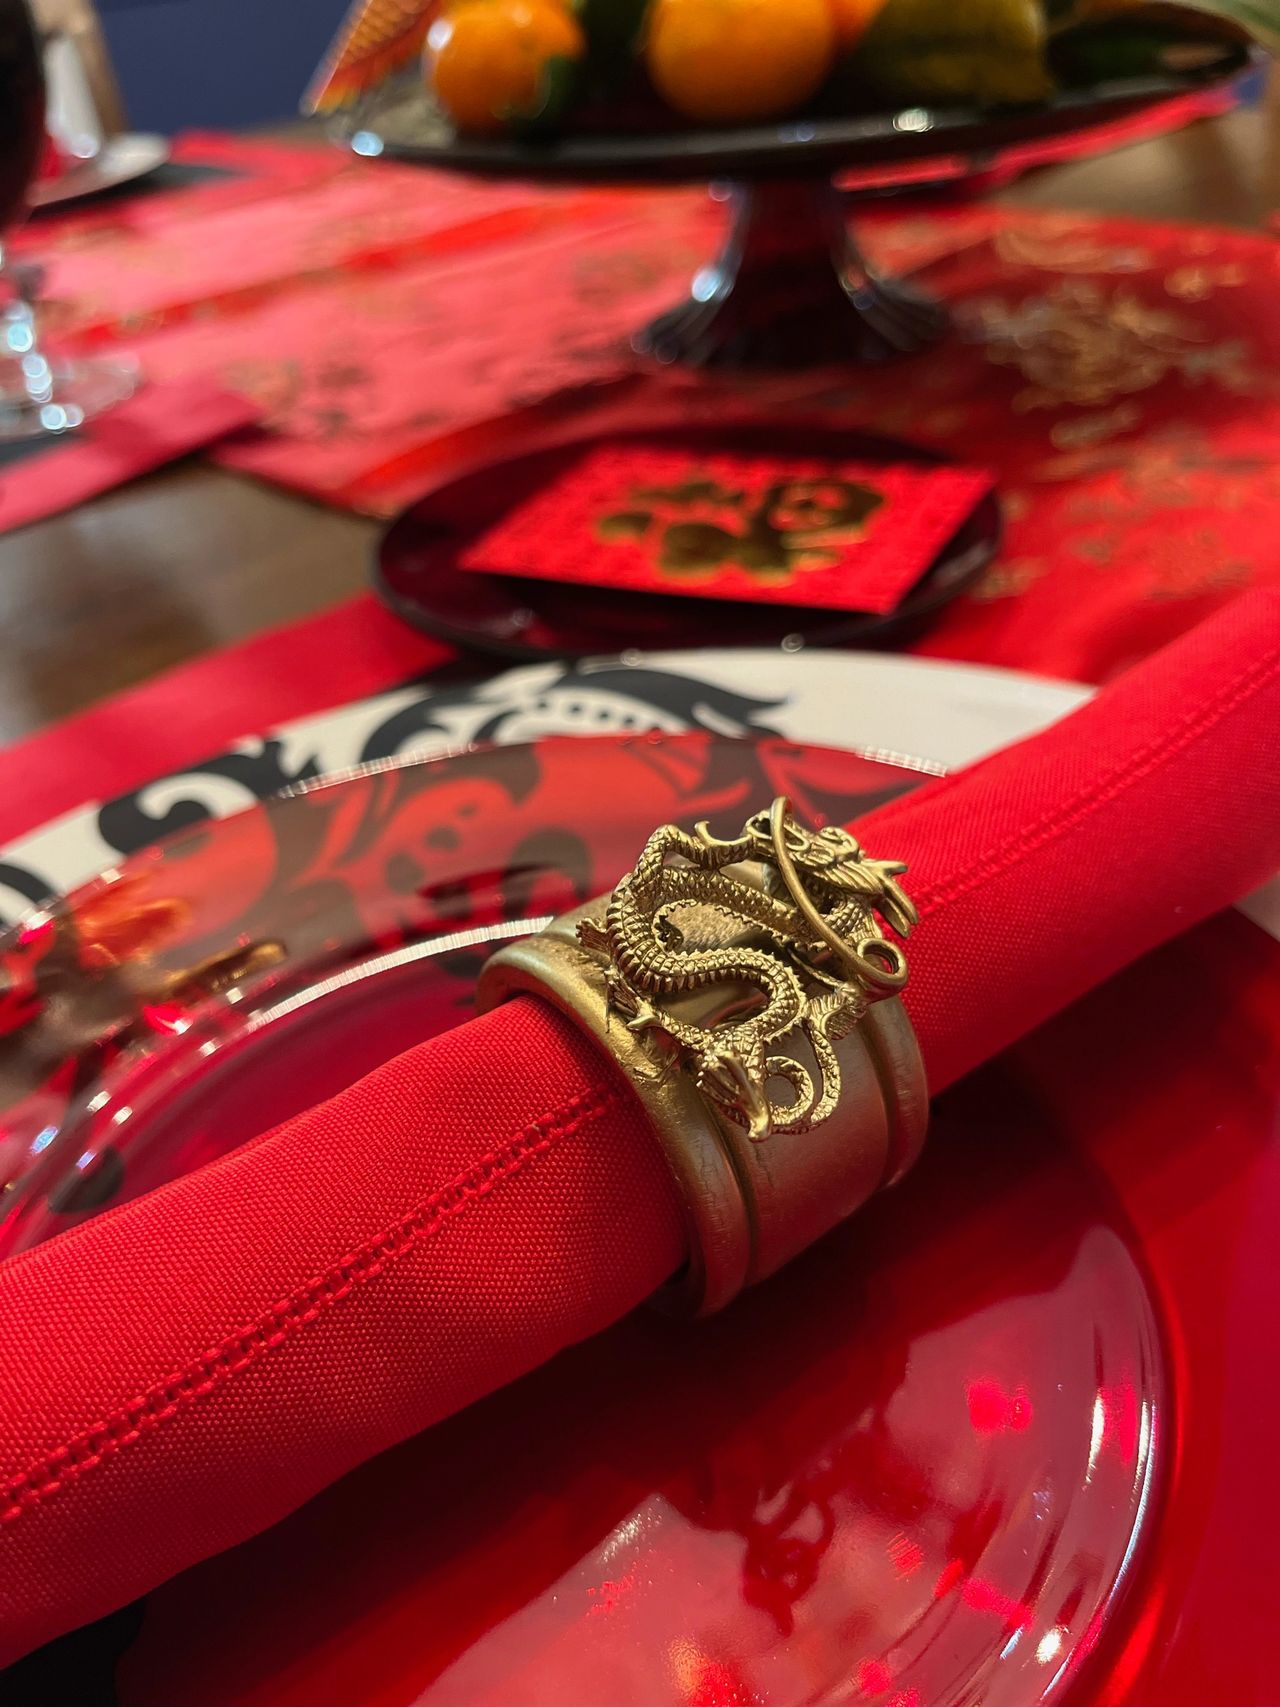 Gold Chinese dragon napkin ring, red napkin, red plate and Chinese fabric in background.